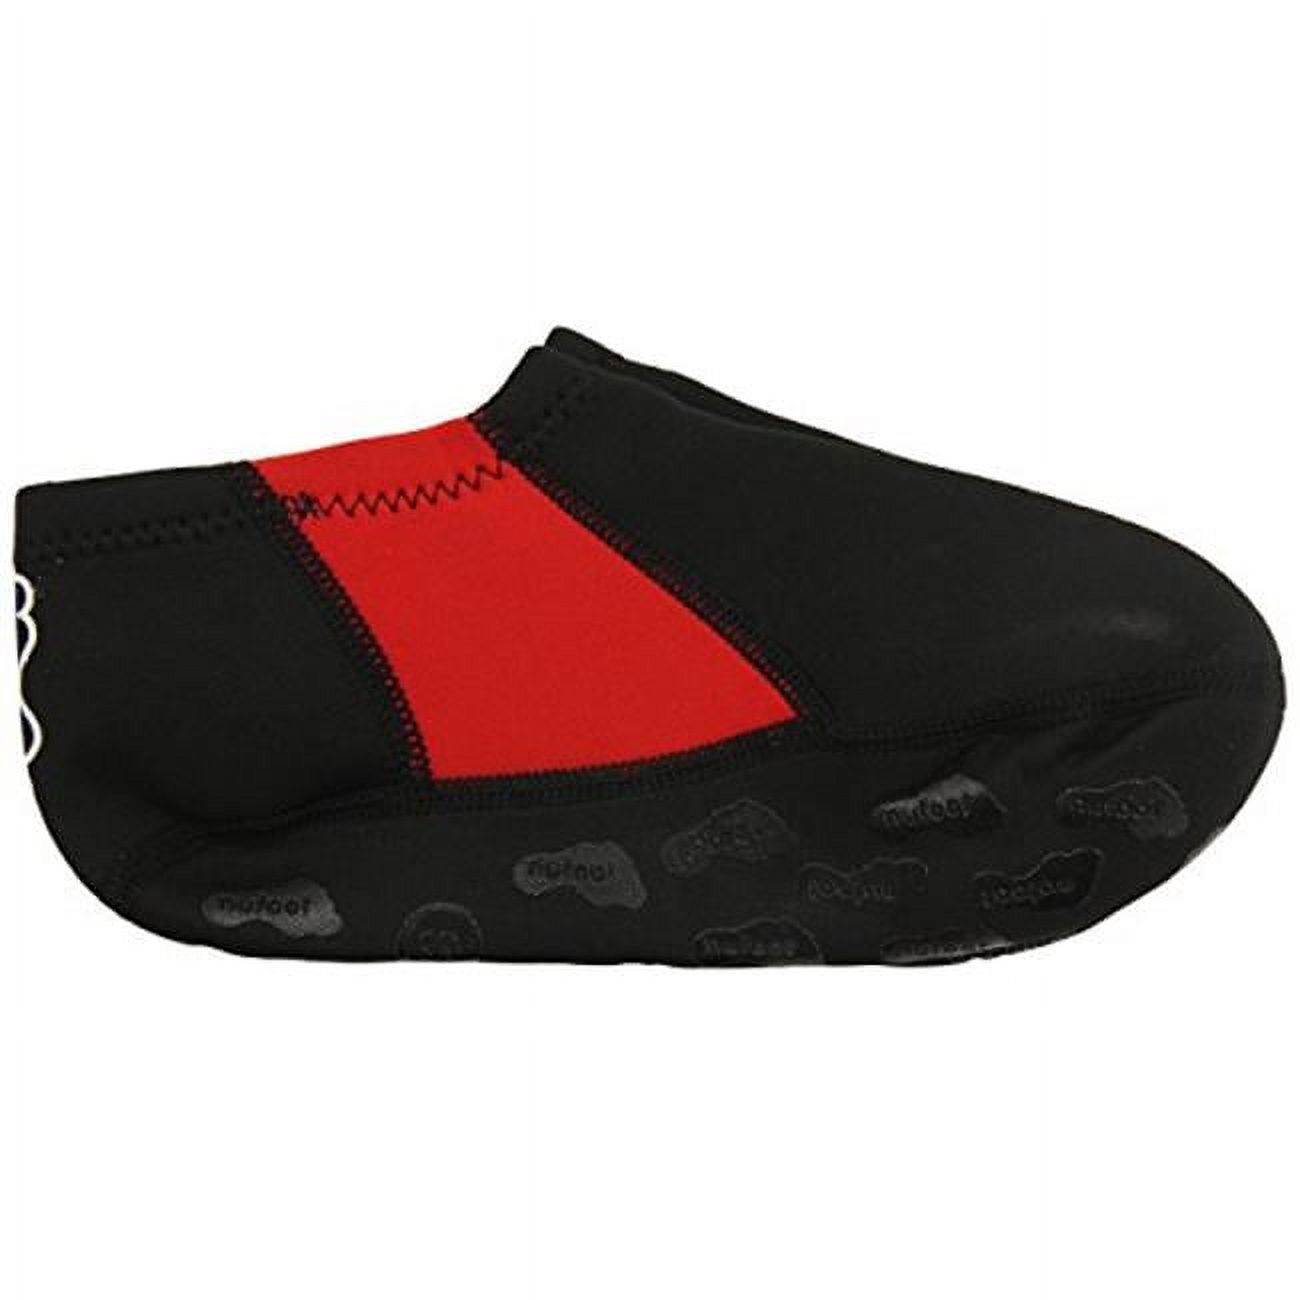 Nufoot 1028 Travel Slipper Booties Black With Red Large Fits Shoe Size 8-11 - image 1 of 4